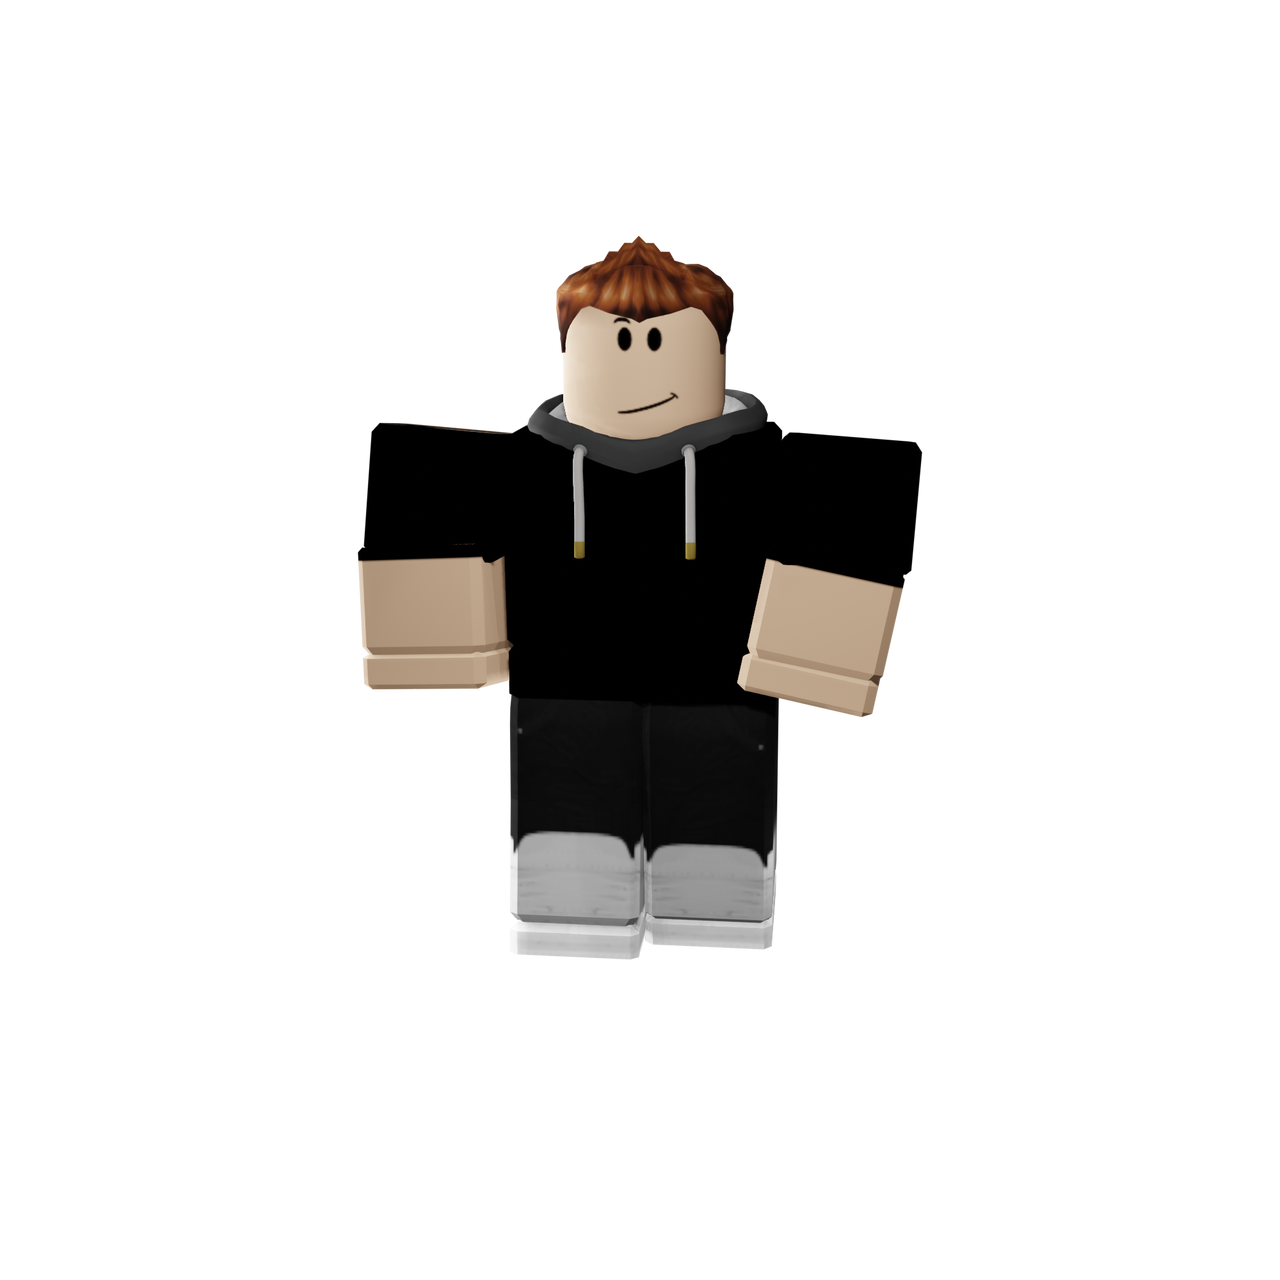 Basic Boy Roblox Render By Pipxal On Deviantart - boy roblox character png